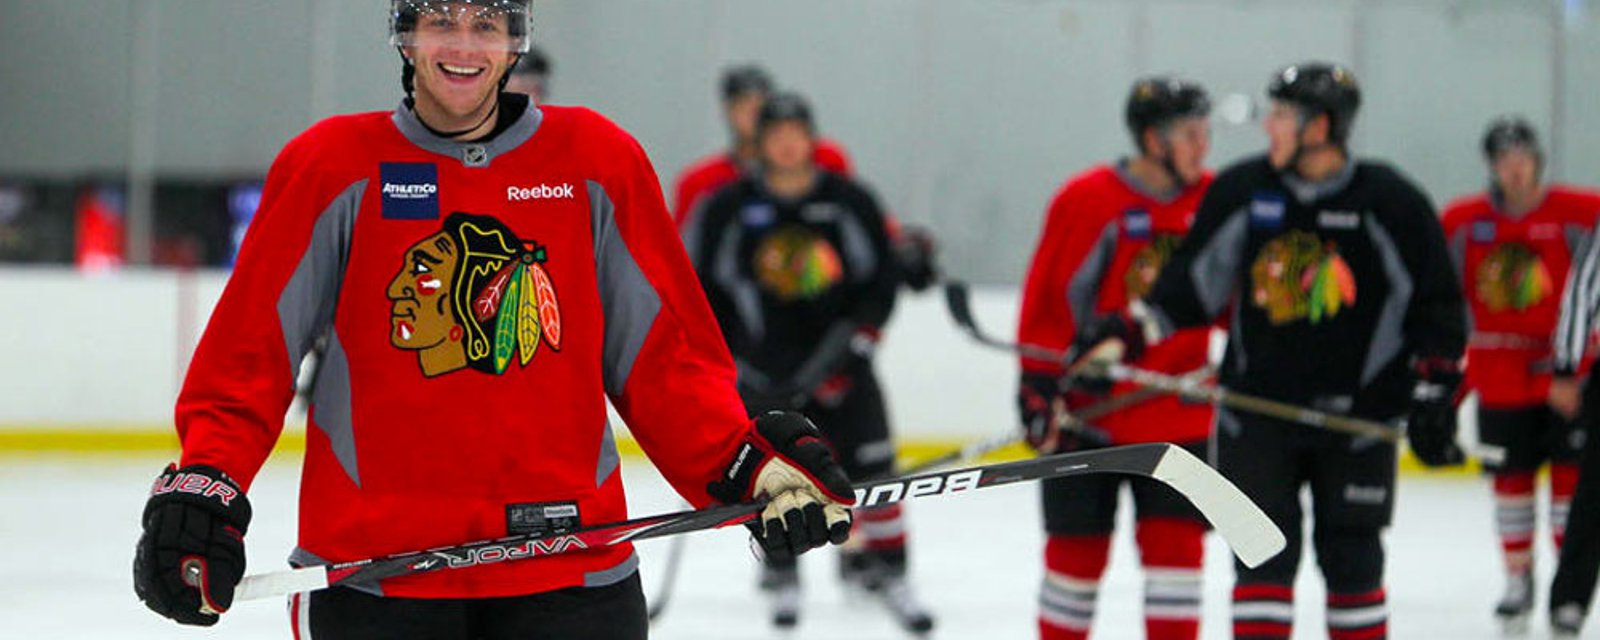 Patrick Kane’s Dad brings a special sign to honor his son at Blackhawks practice